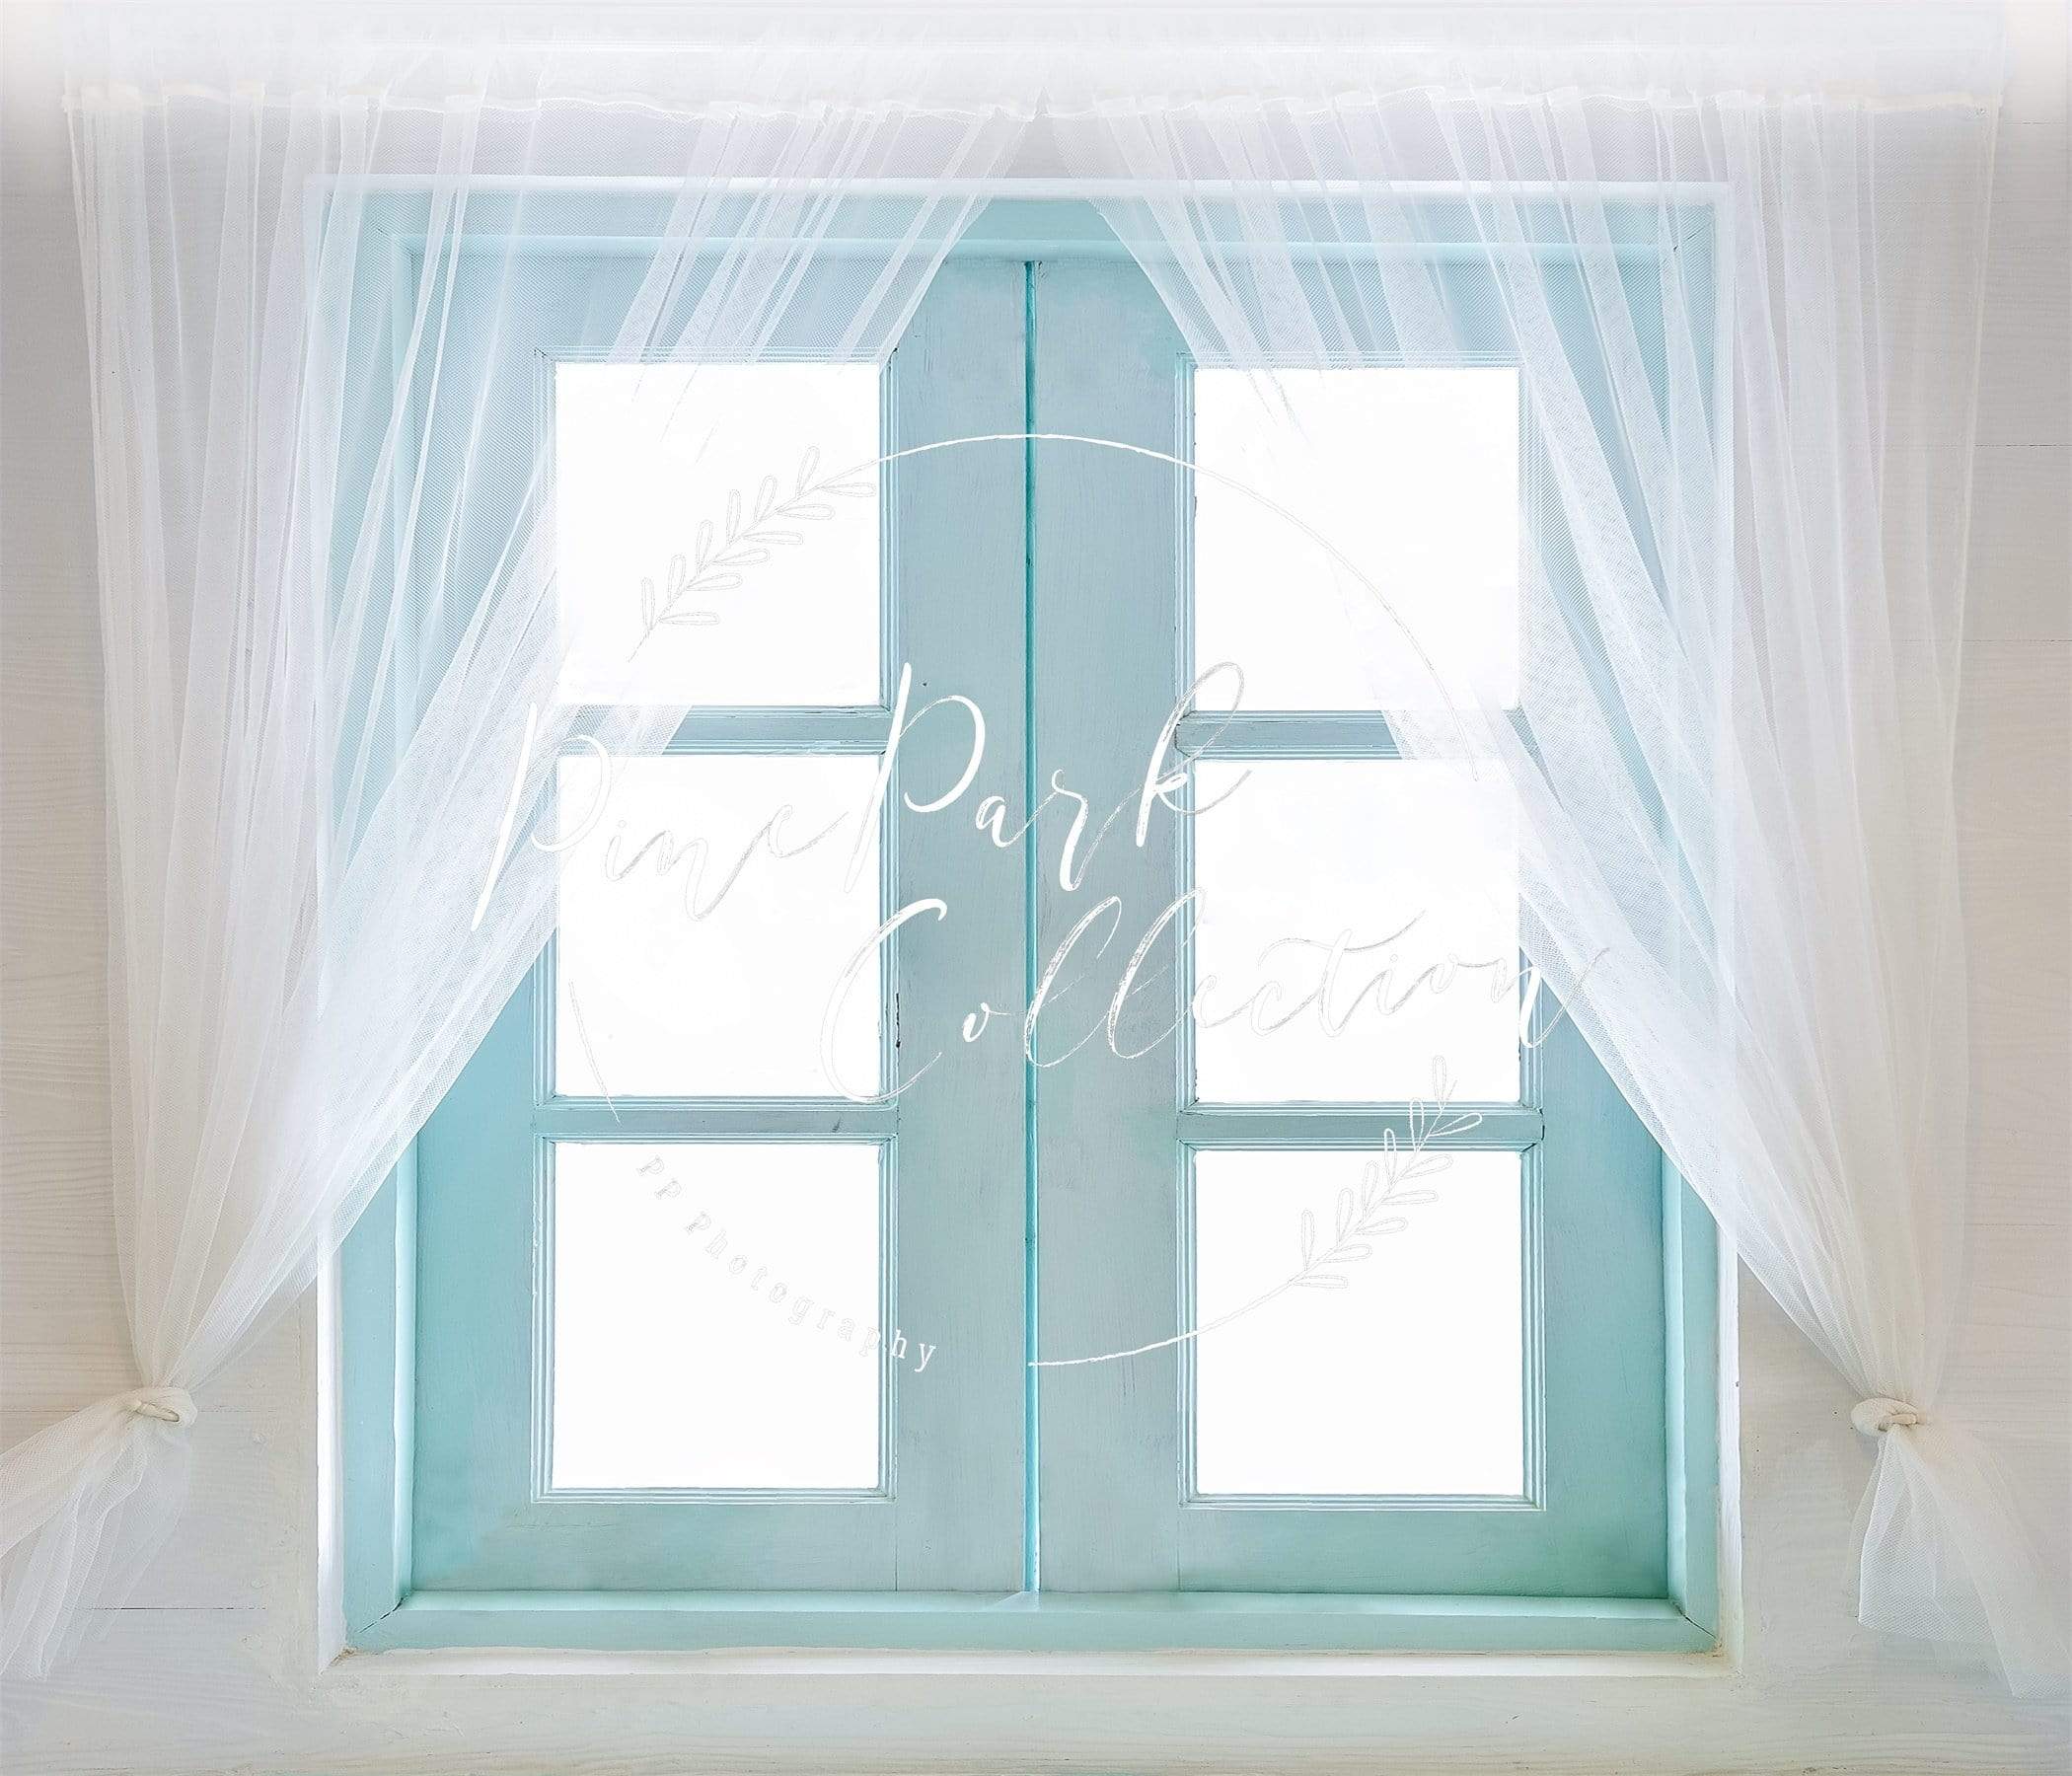 Kate Teal Window Doors Backdrop for Photography Designed By Pine Park Collection